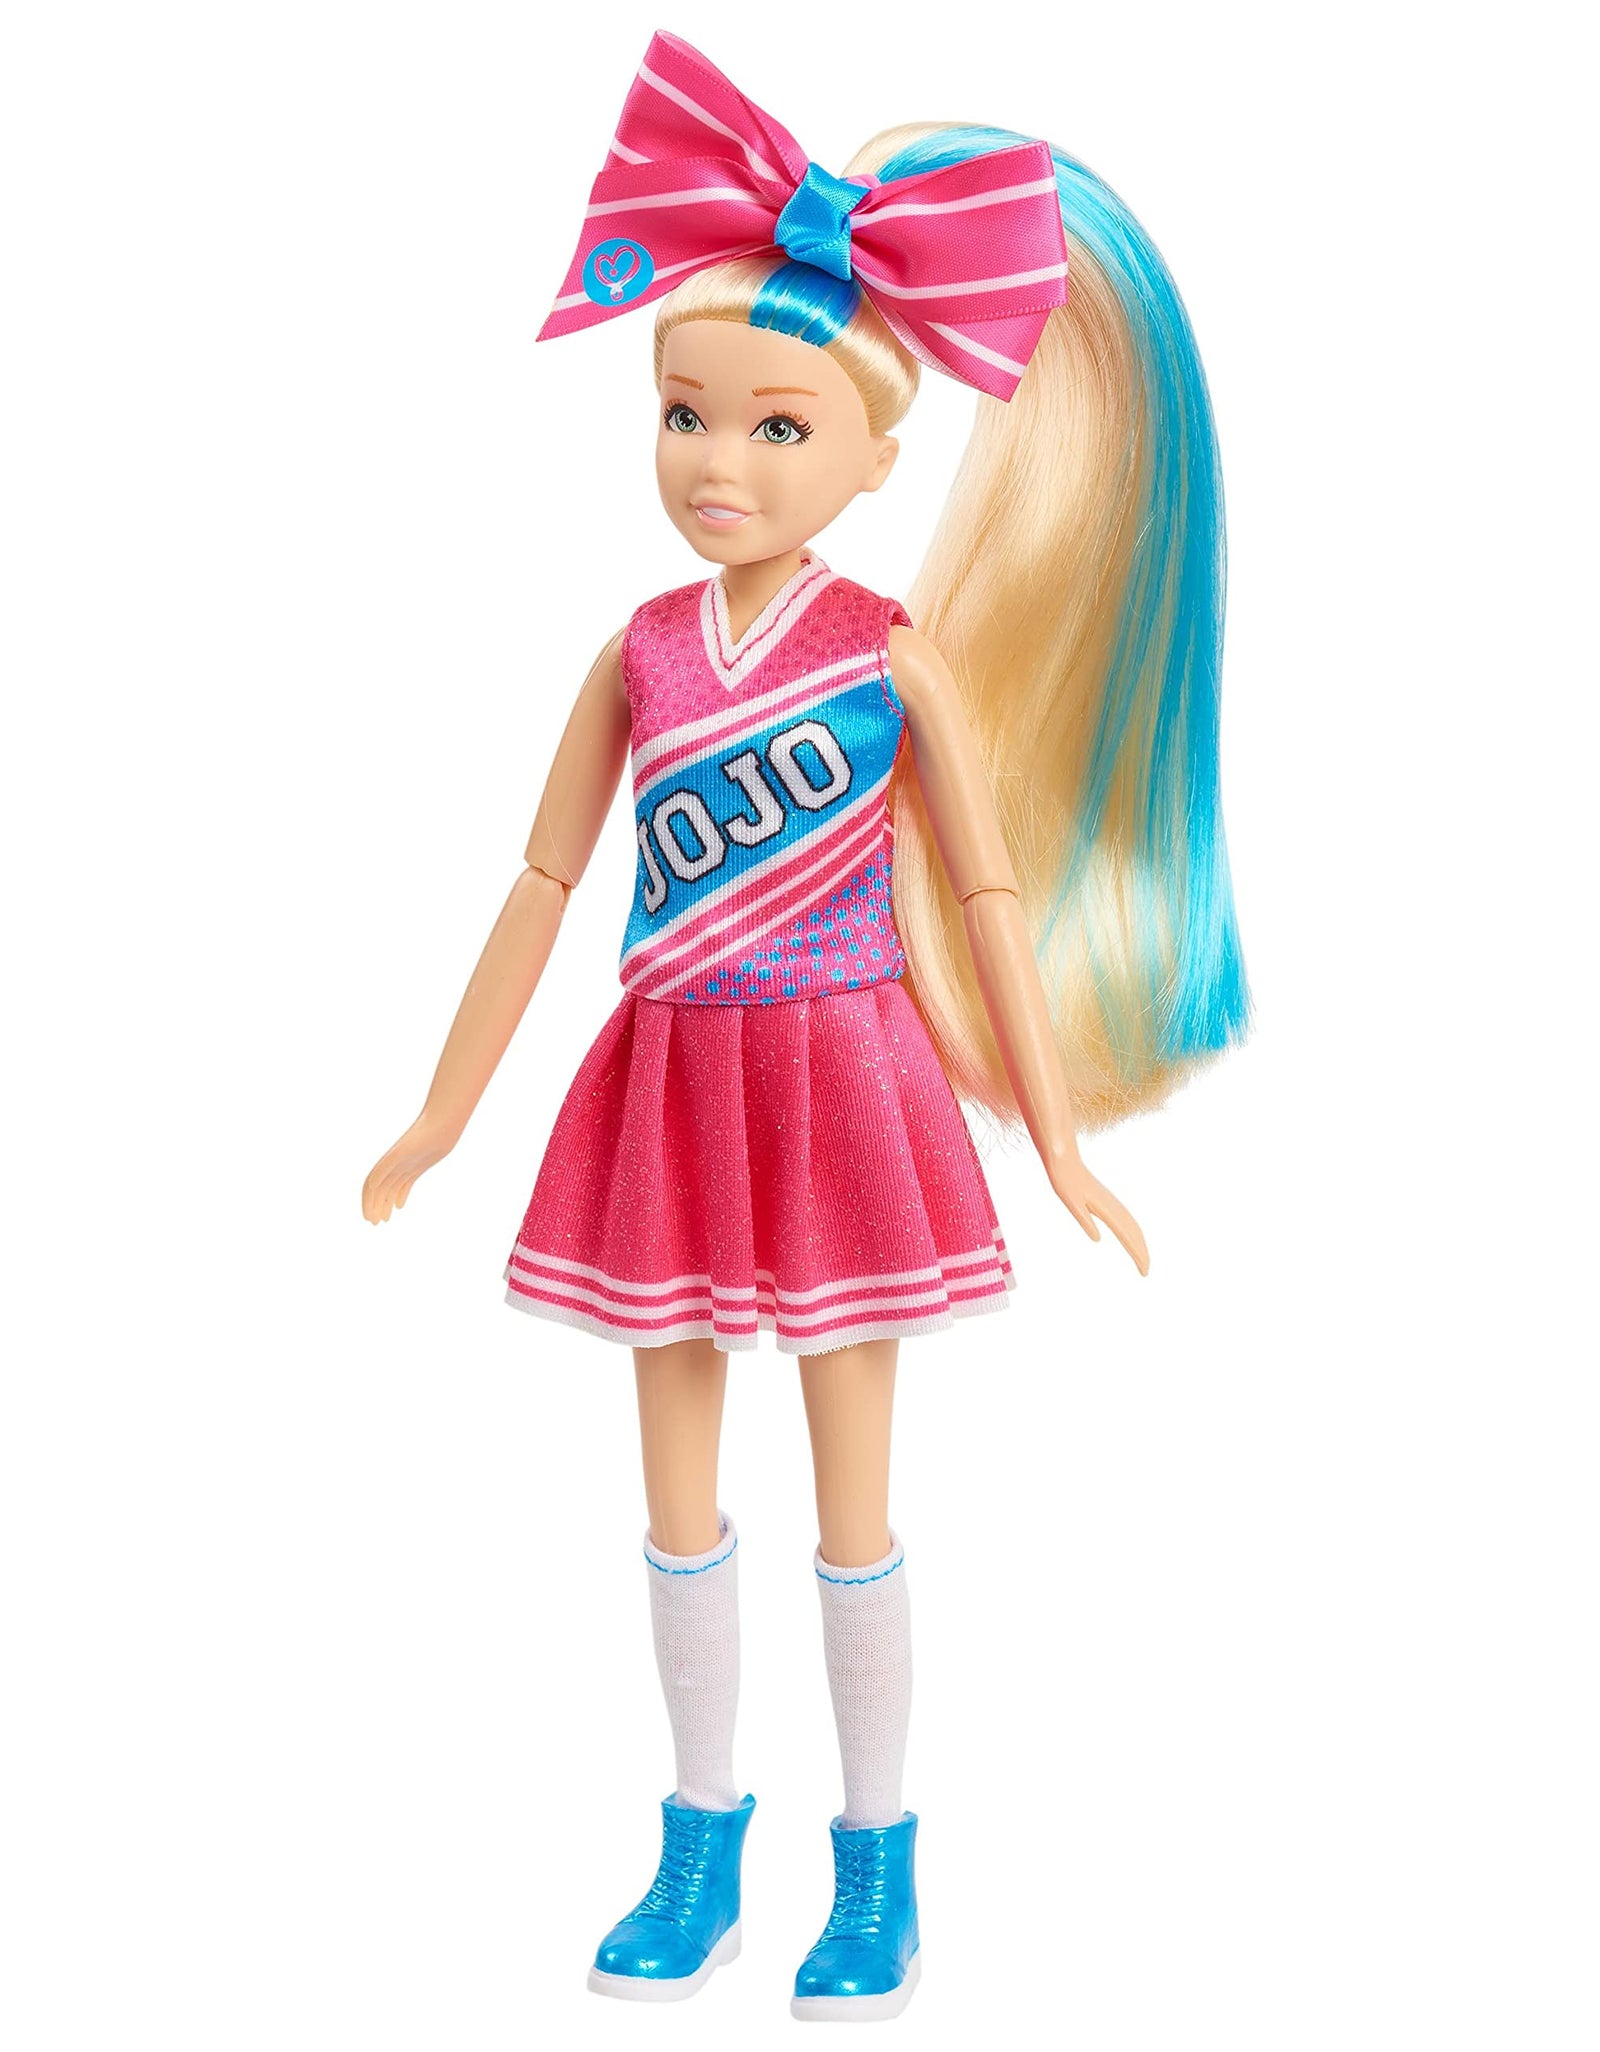 JoJo Siwa 10 Inch Singing Doll, Sings High Top Shoes, Pink Cheerleading Outfit and Accessories, by Just Play